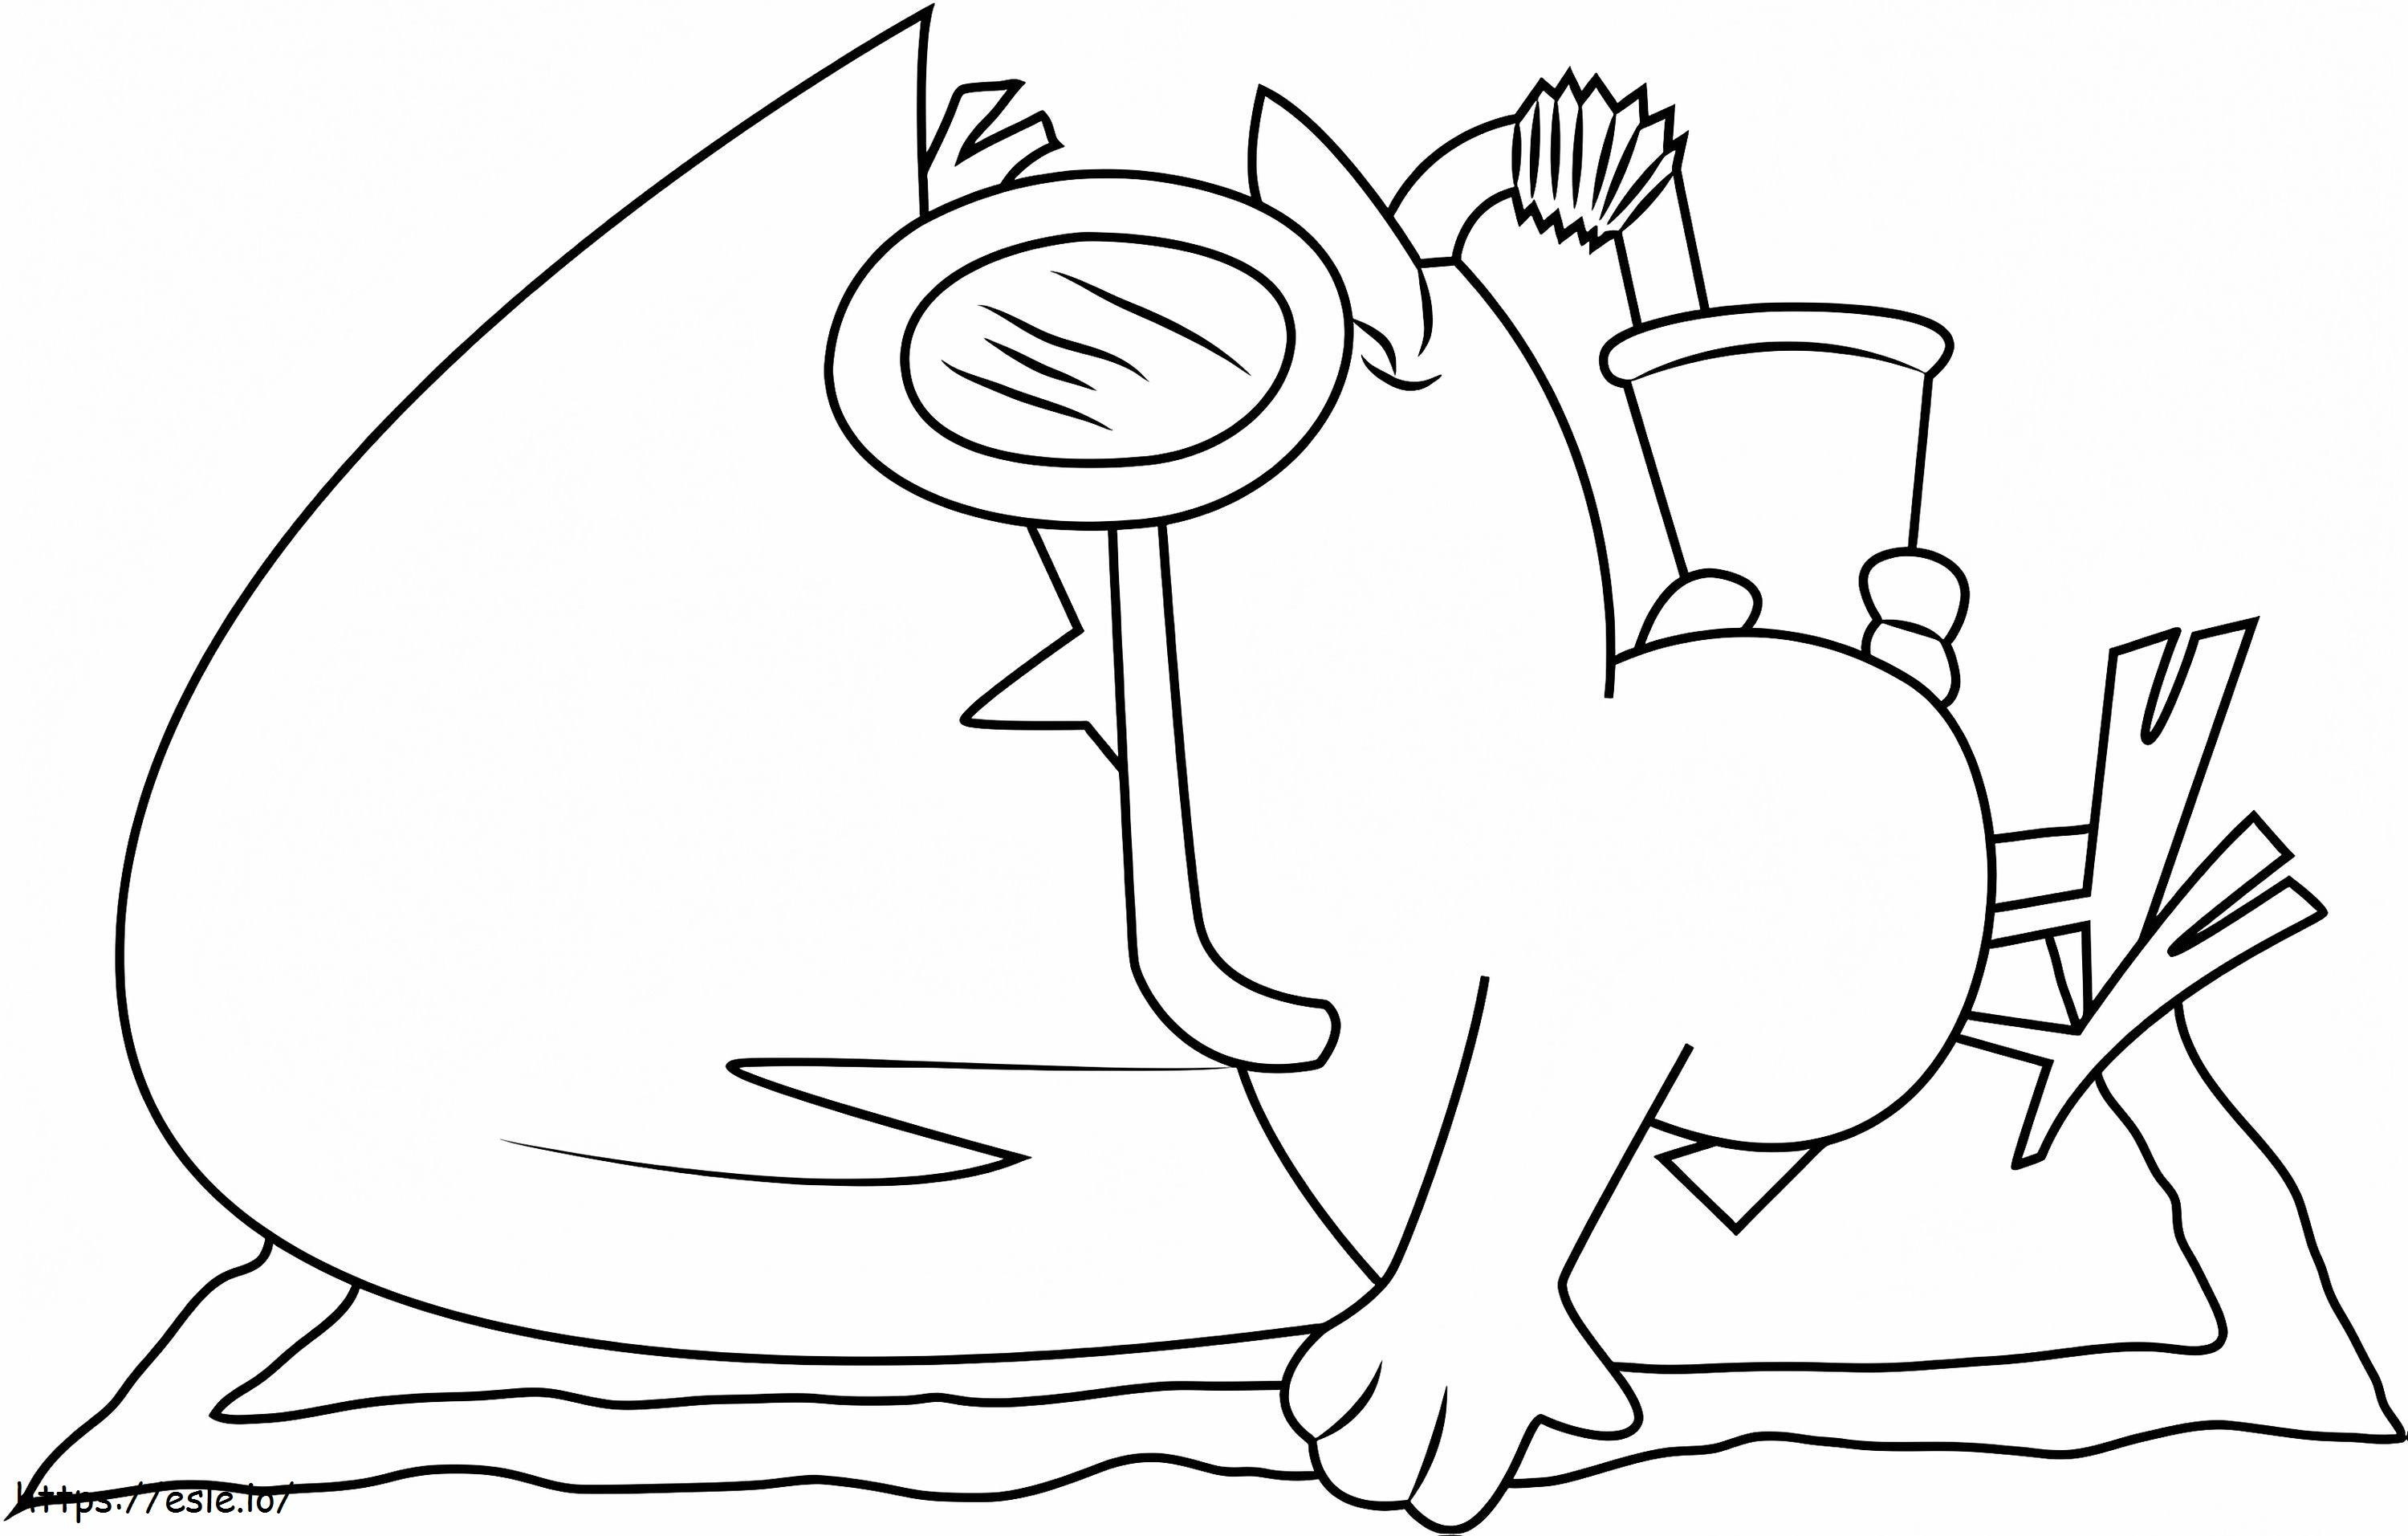 1530848263 Calimero Relaxing A4 coloring page